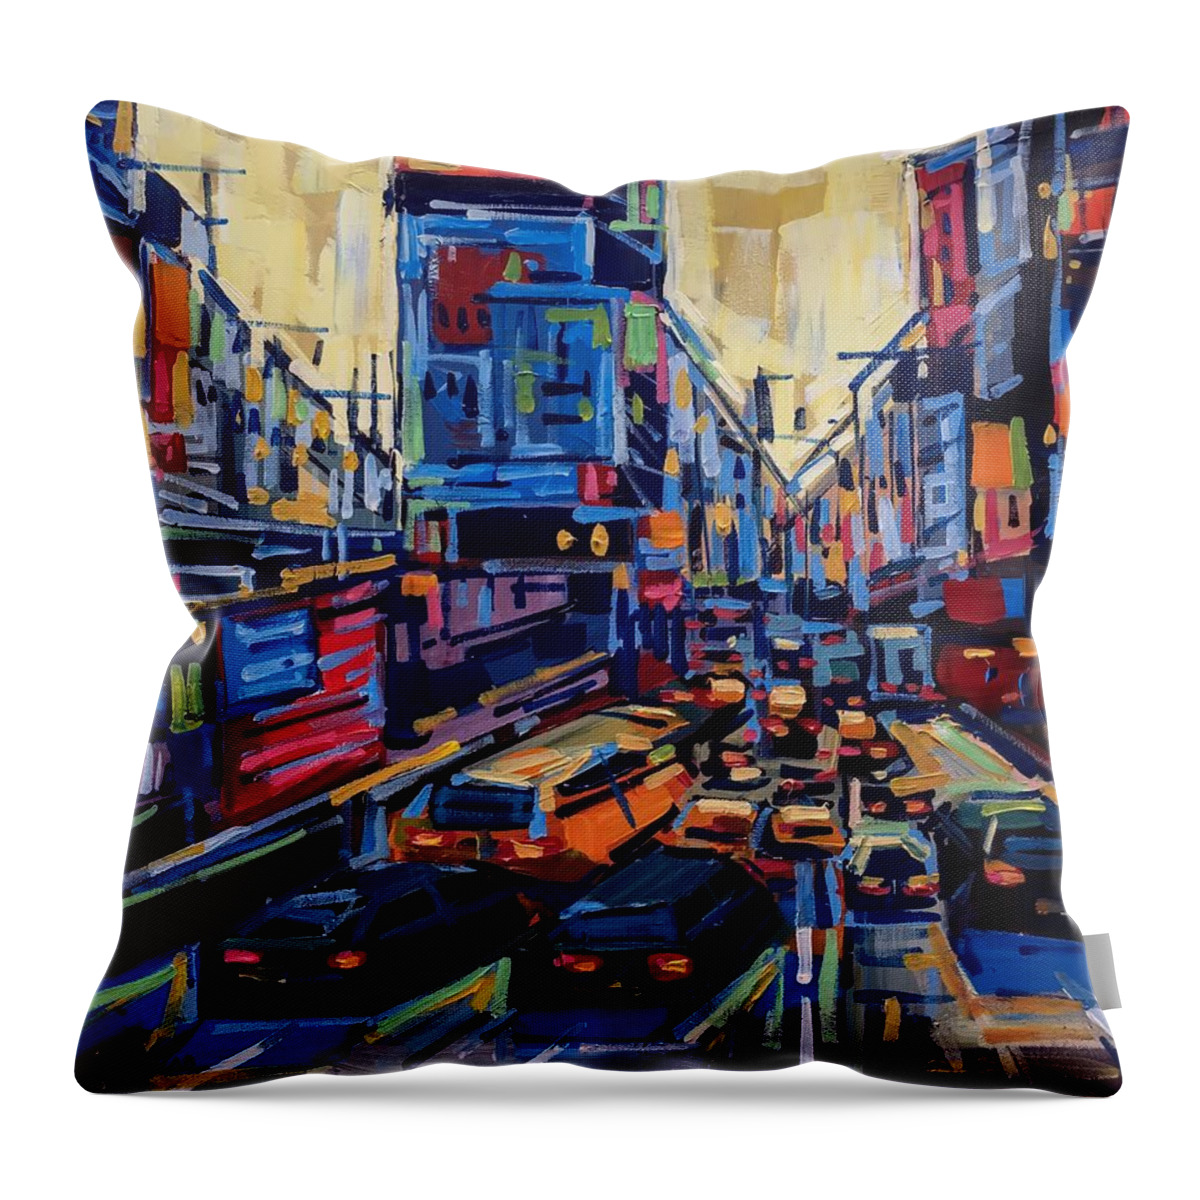 New York Throw Pillow featuring the painting Facades #4 by Enrique Zaldivar